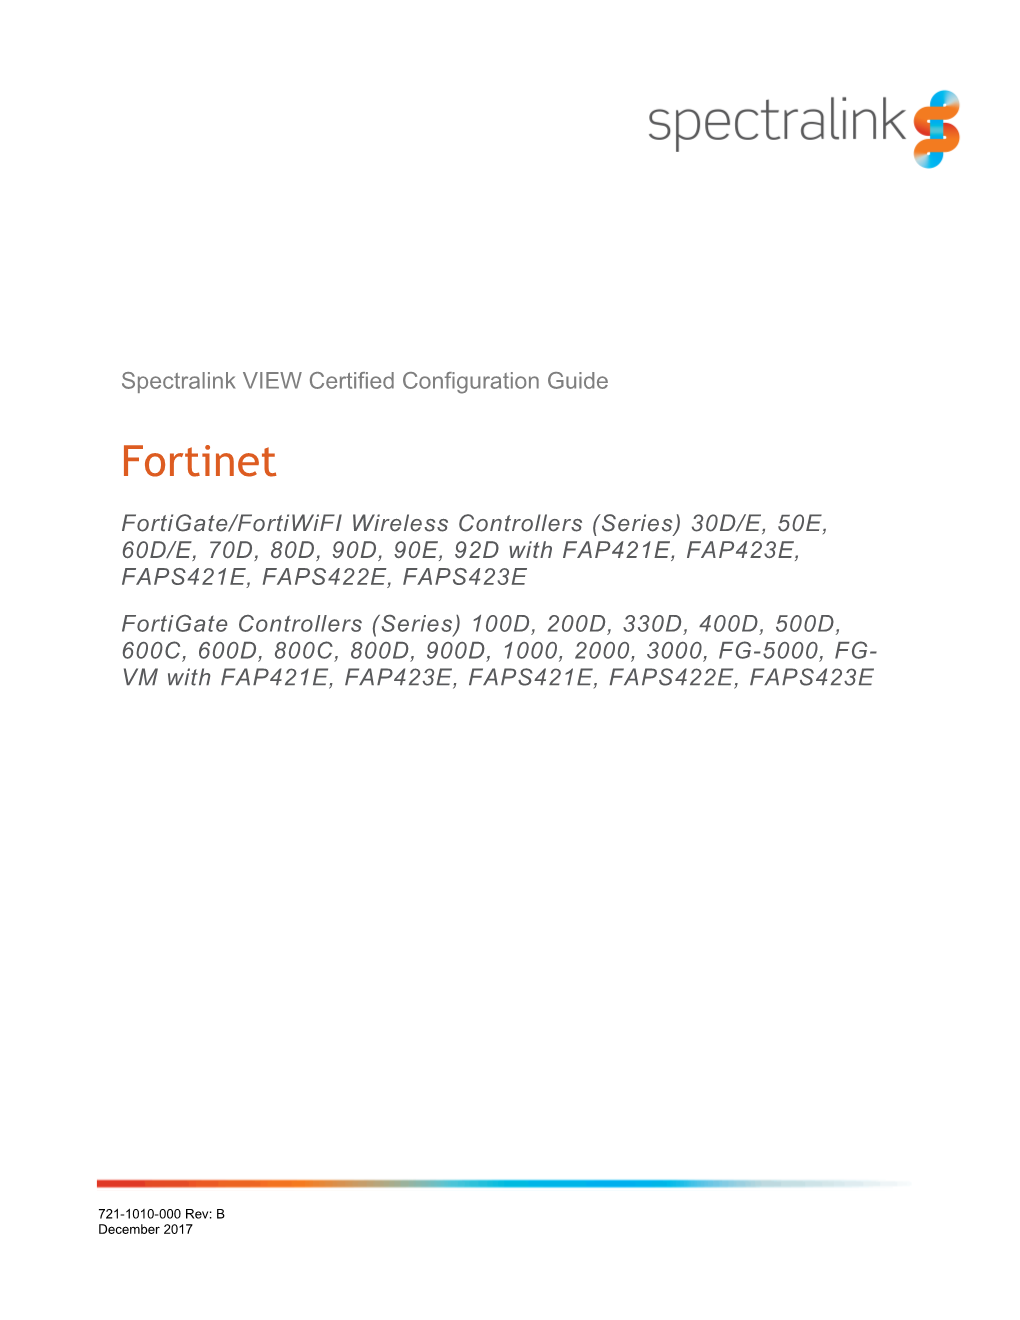 VIEW Cert: Fortinet: Fortigate/Fortiwifi Wireless Controllers and Fortigate Controllers